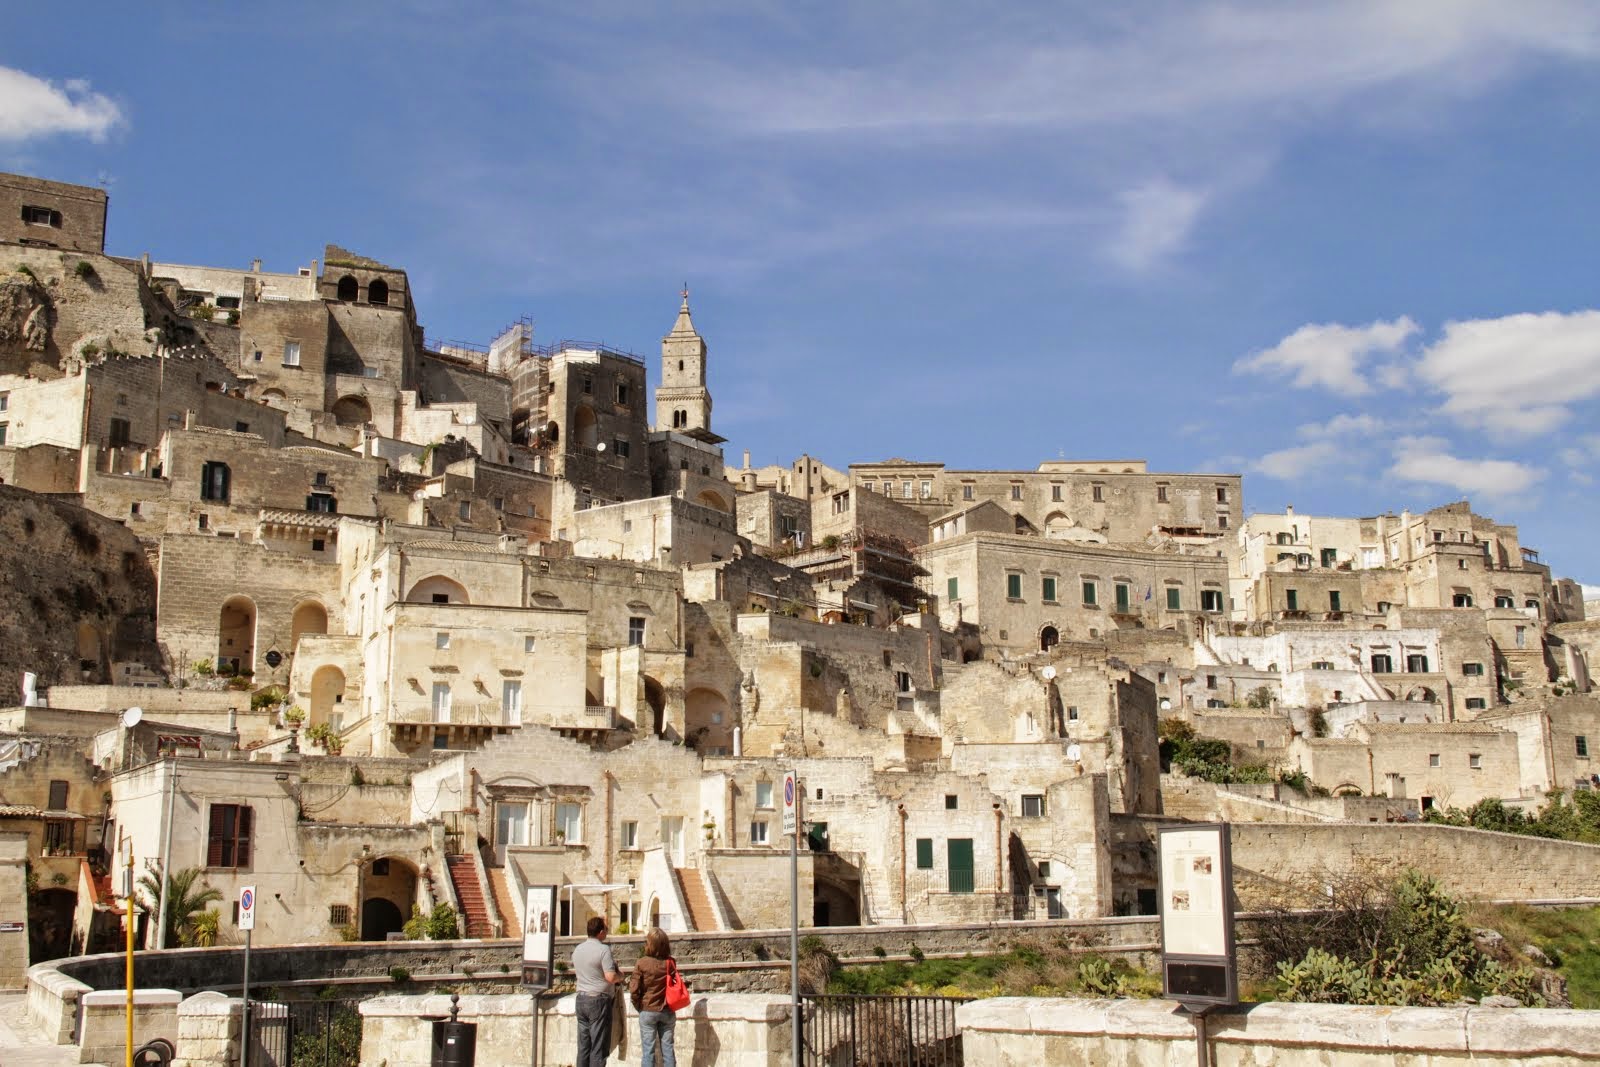 Cave Dwellings in Matera